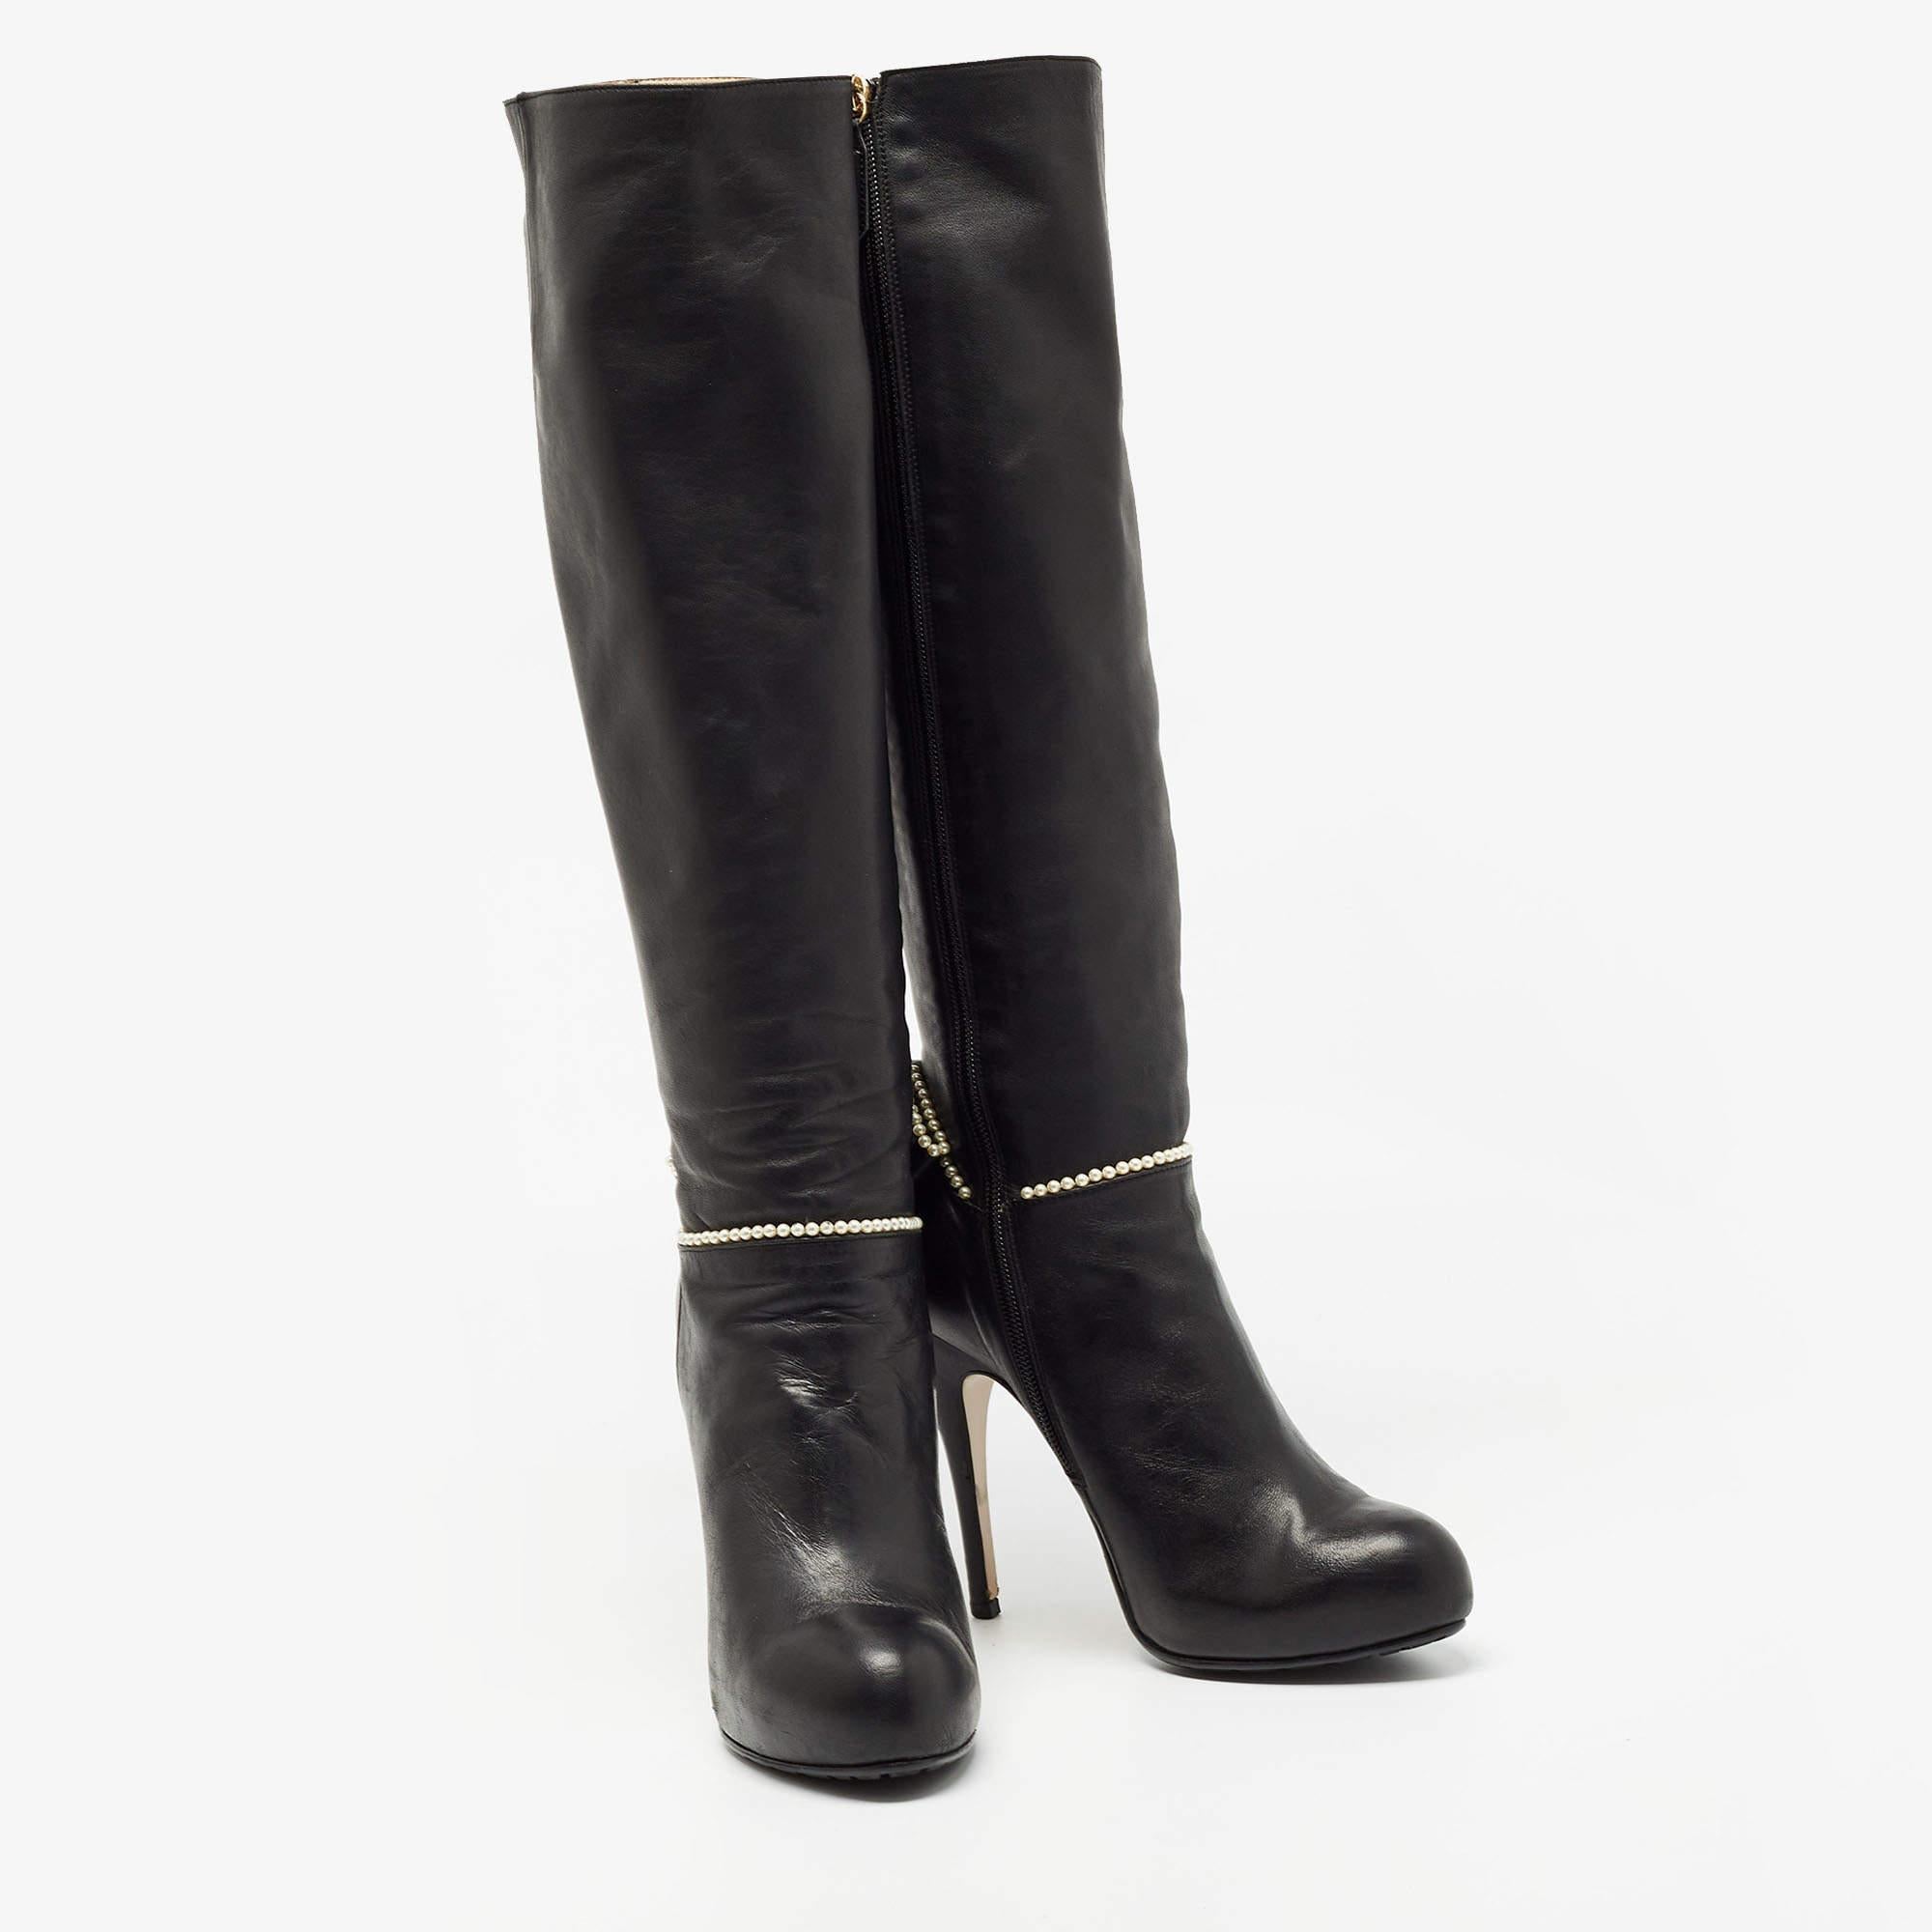 Valentino Black Leather Knee Length Boots Size 38 In Good Condition For Sale In Dubai, Al Qouz 2